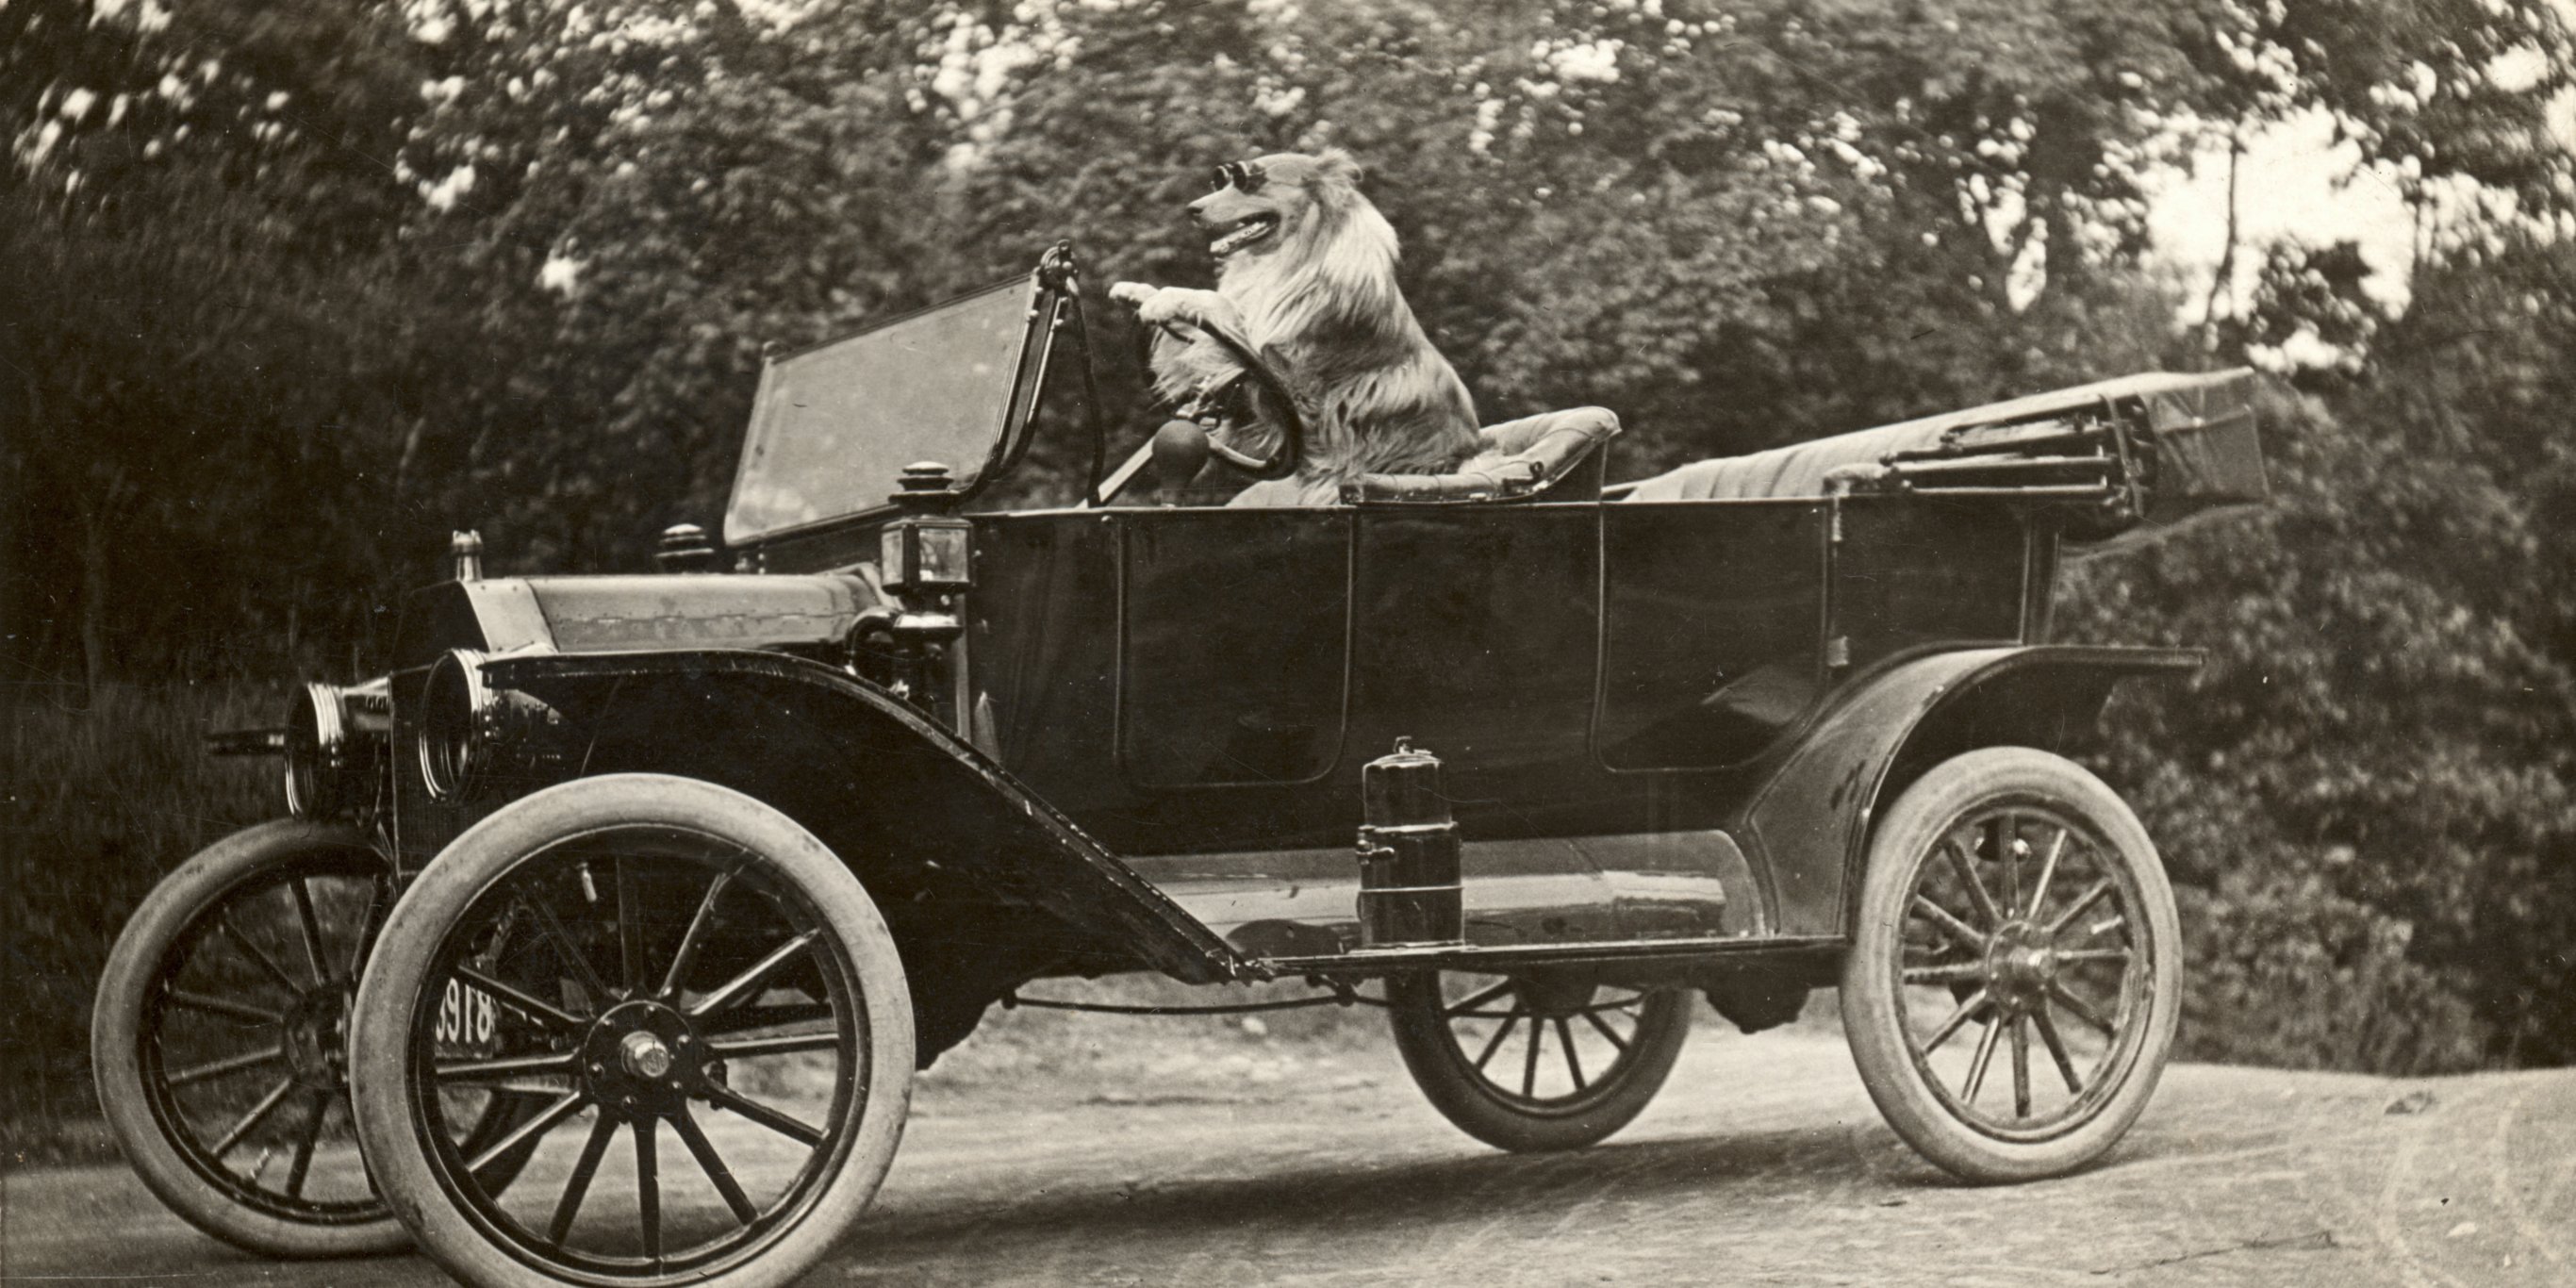 13 vintage photos of the auto industry during America’s first auto boom